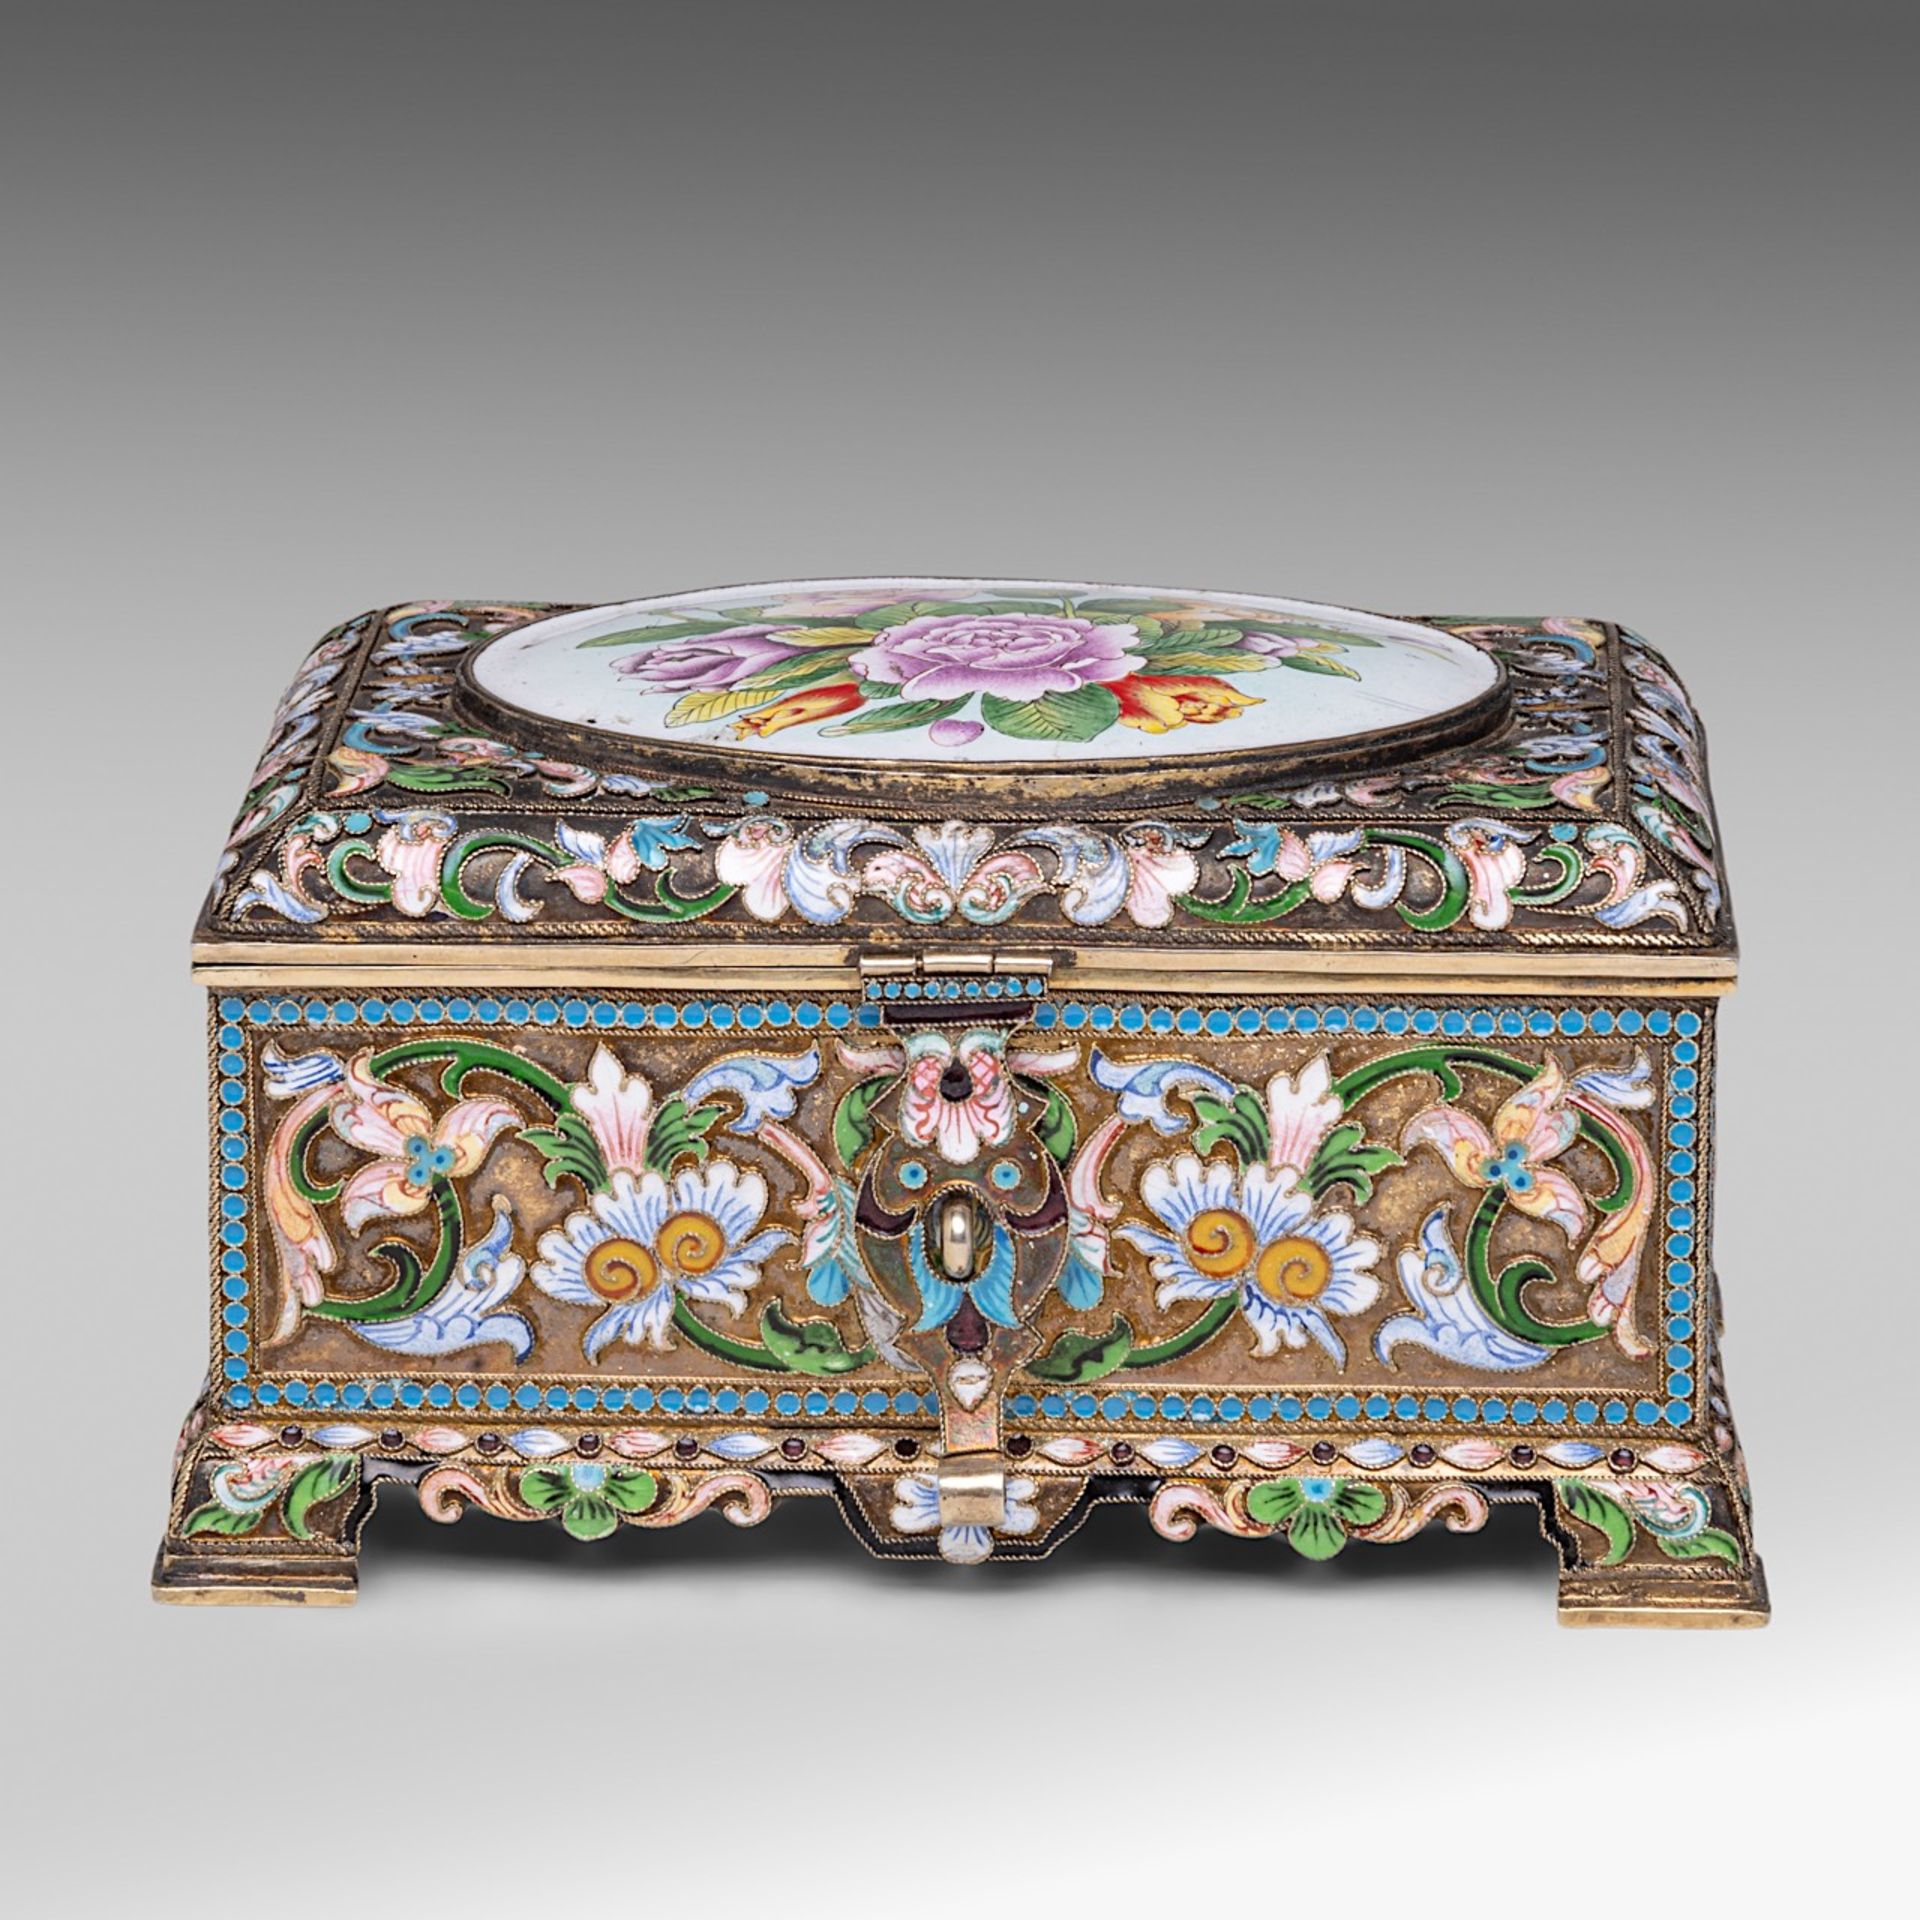 A Russian silver and enamel floral decorated jewellery box, hallmarked 84 Zolotniki, H 8 - 15 - 10 c - Image 2 of 9